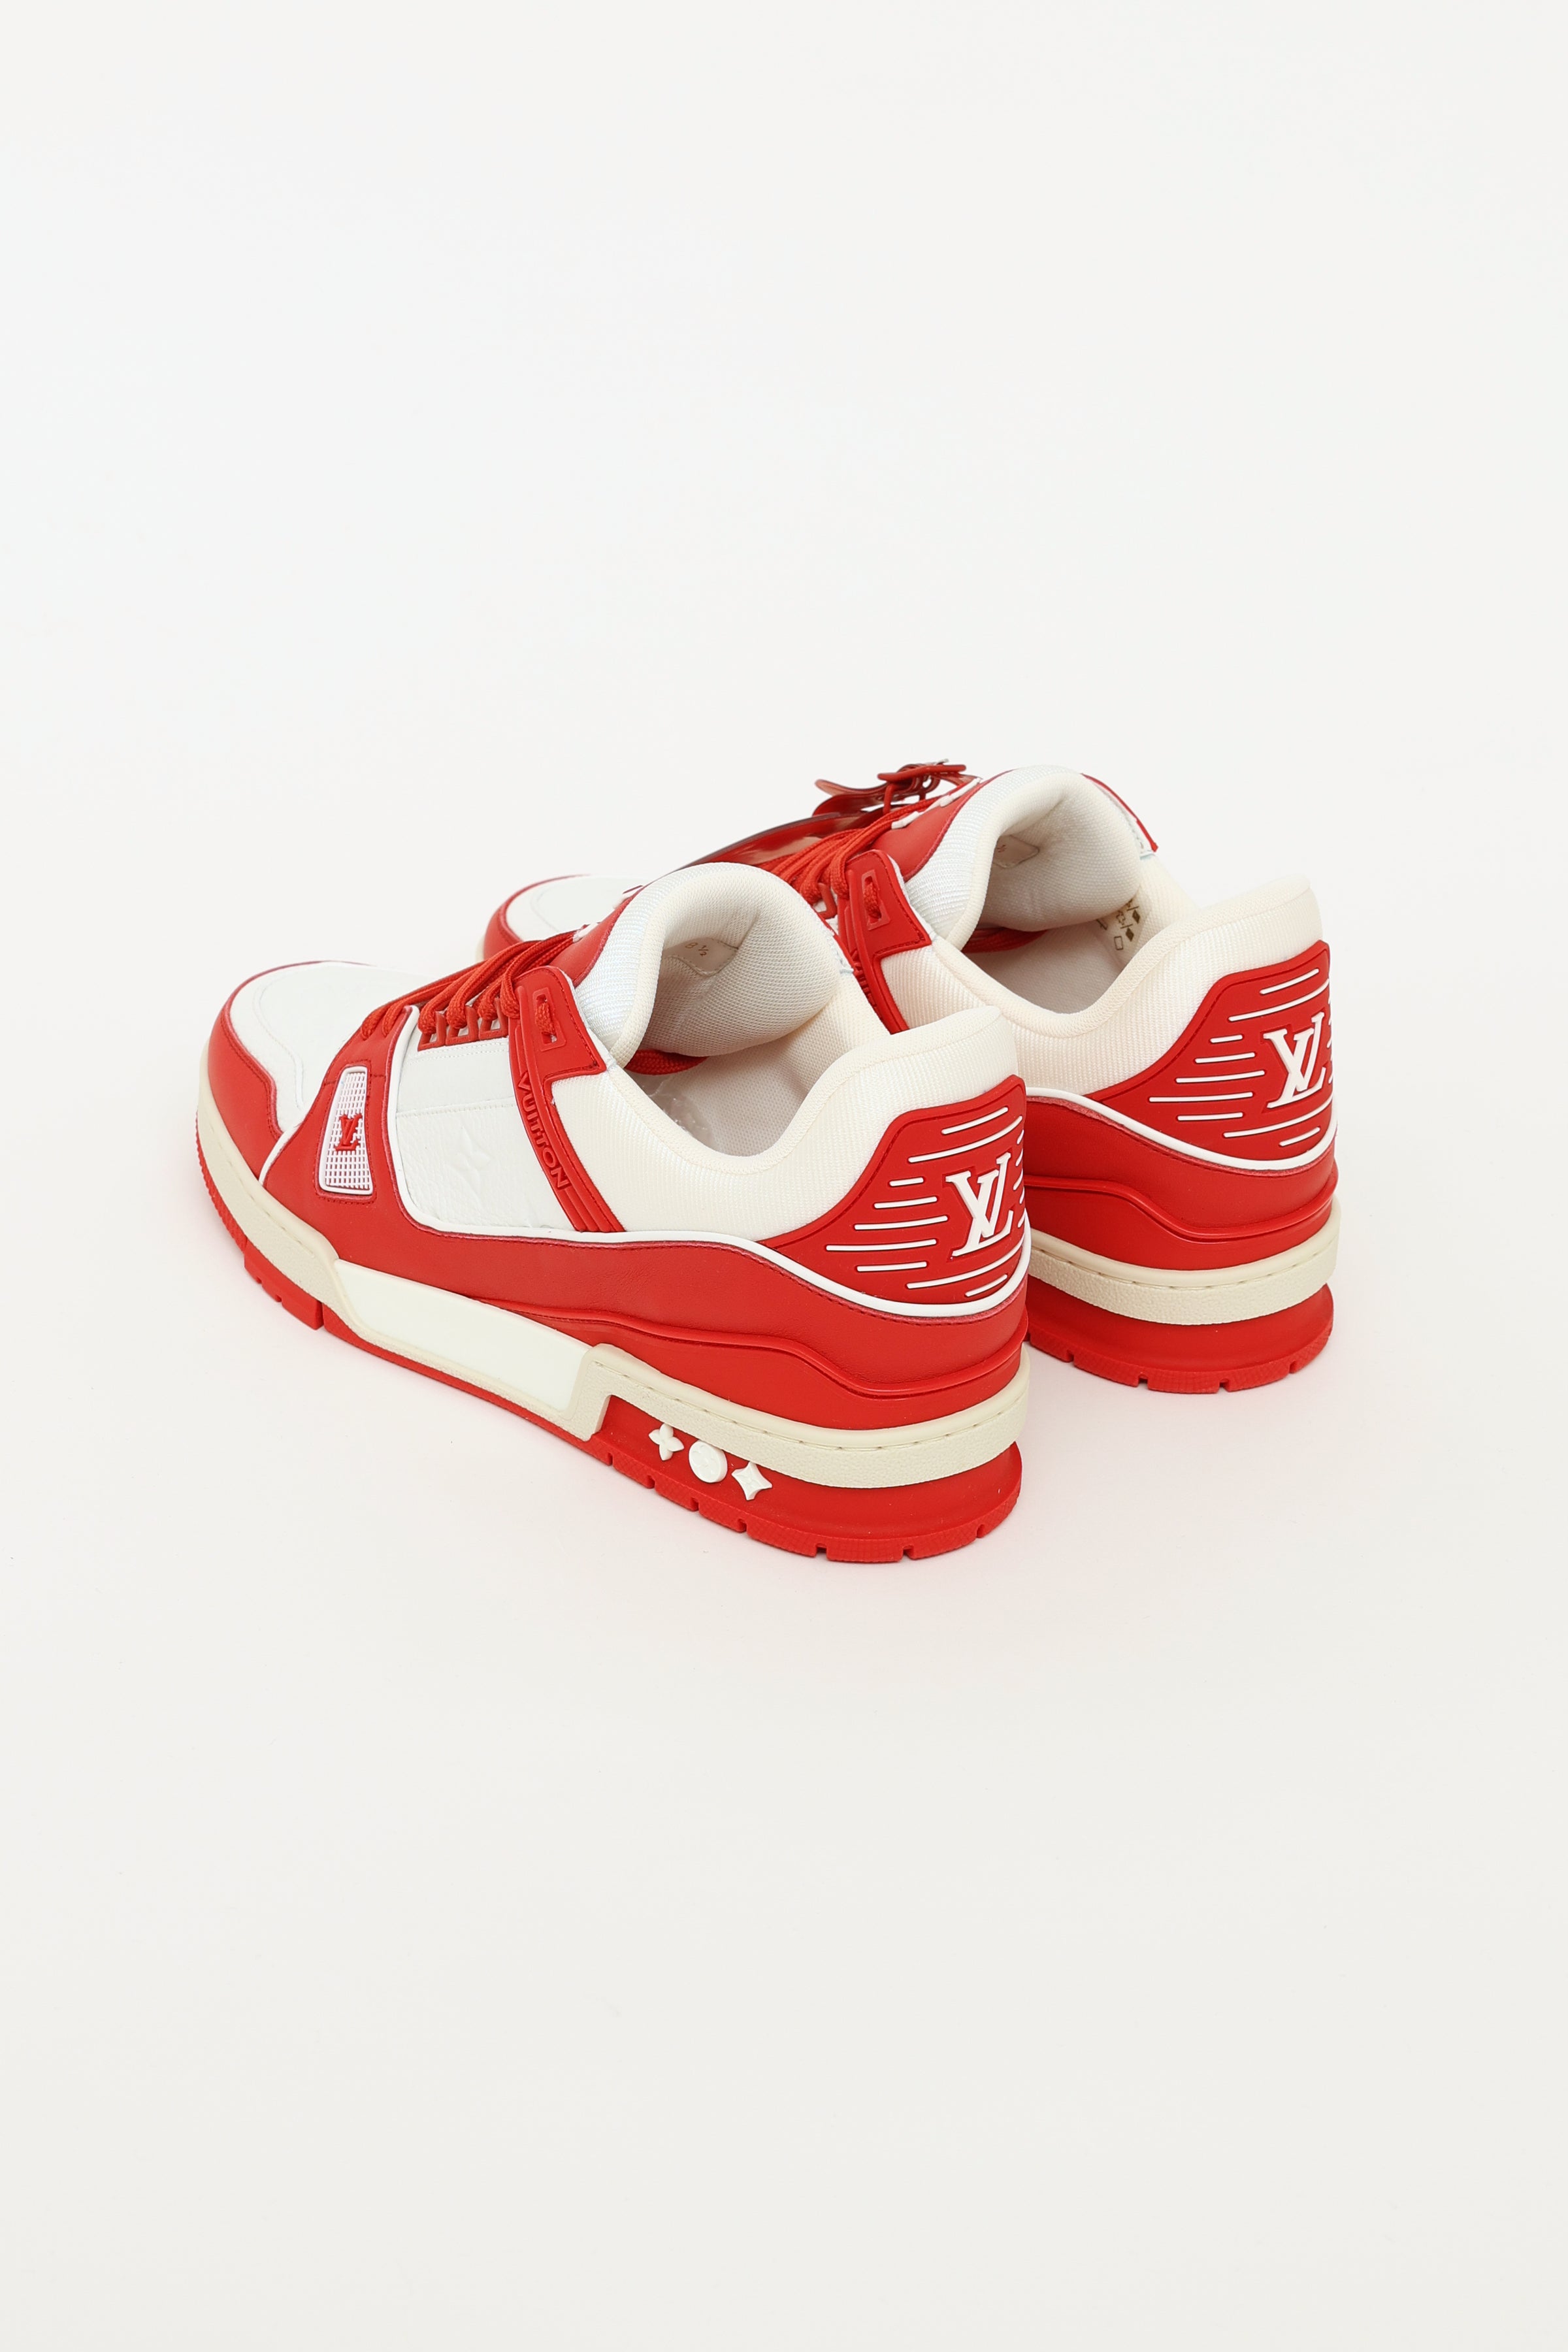 Louis Vuitton x Nike - Authenticated Trainer - Leather Red for Women, Never Worn